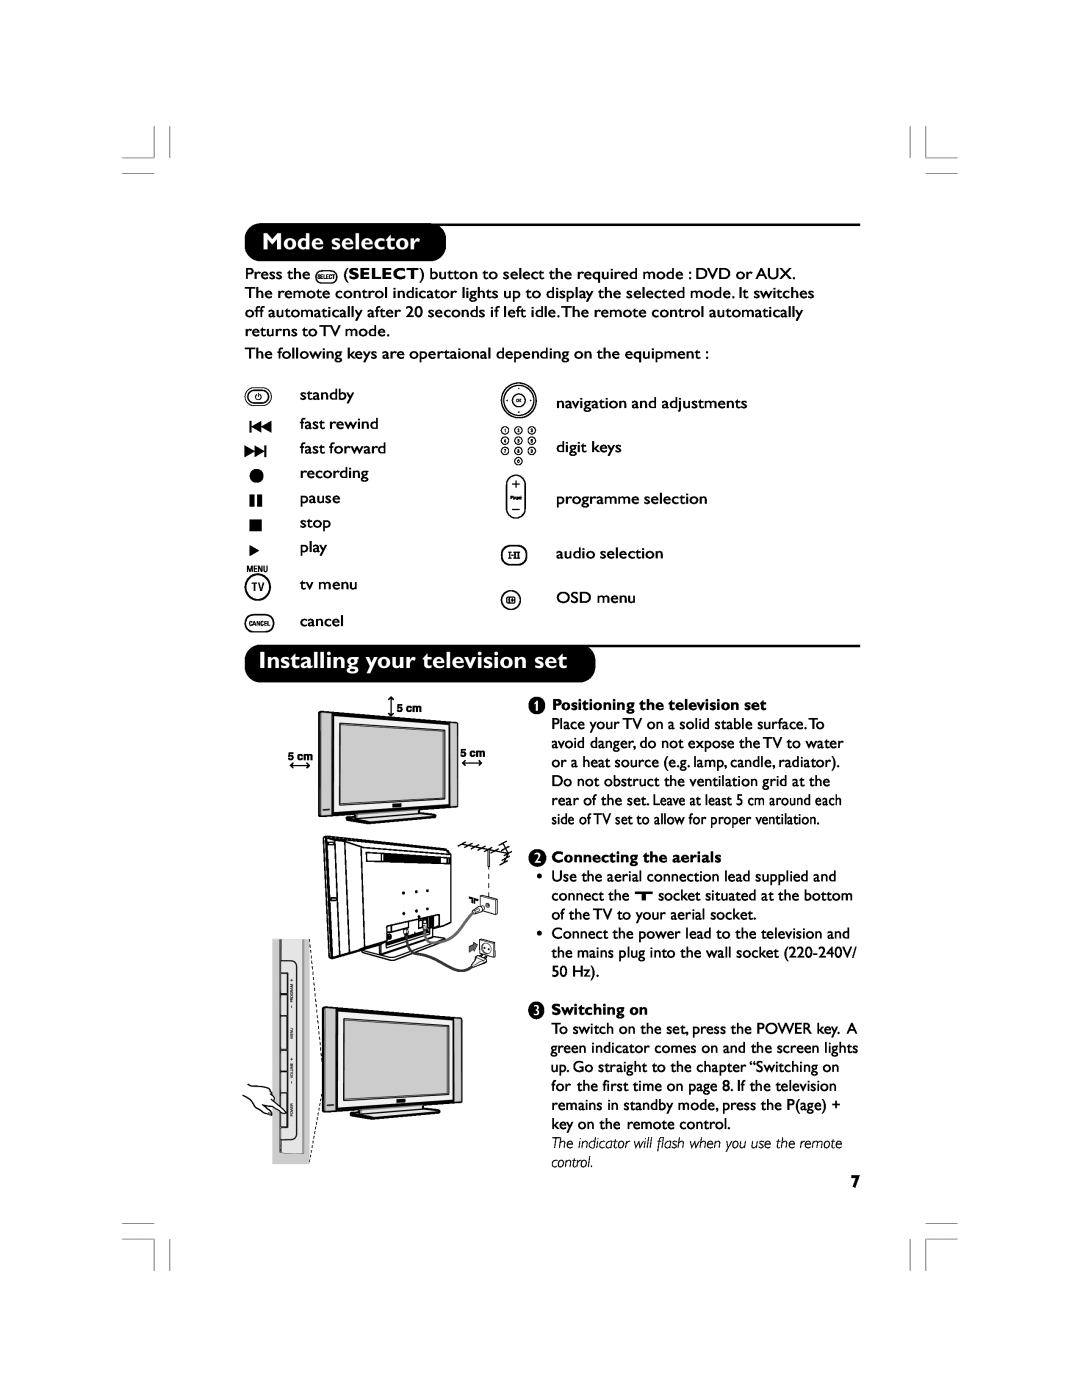 Philips 32PF5520D Mode selector, Installing your television set, Positioning the television set, éConnecting the aerials 